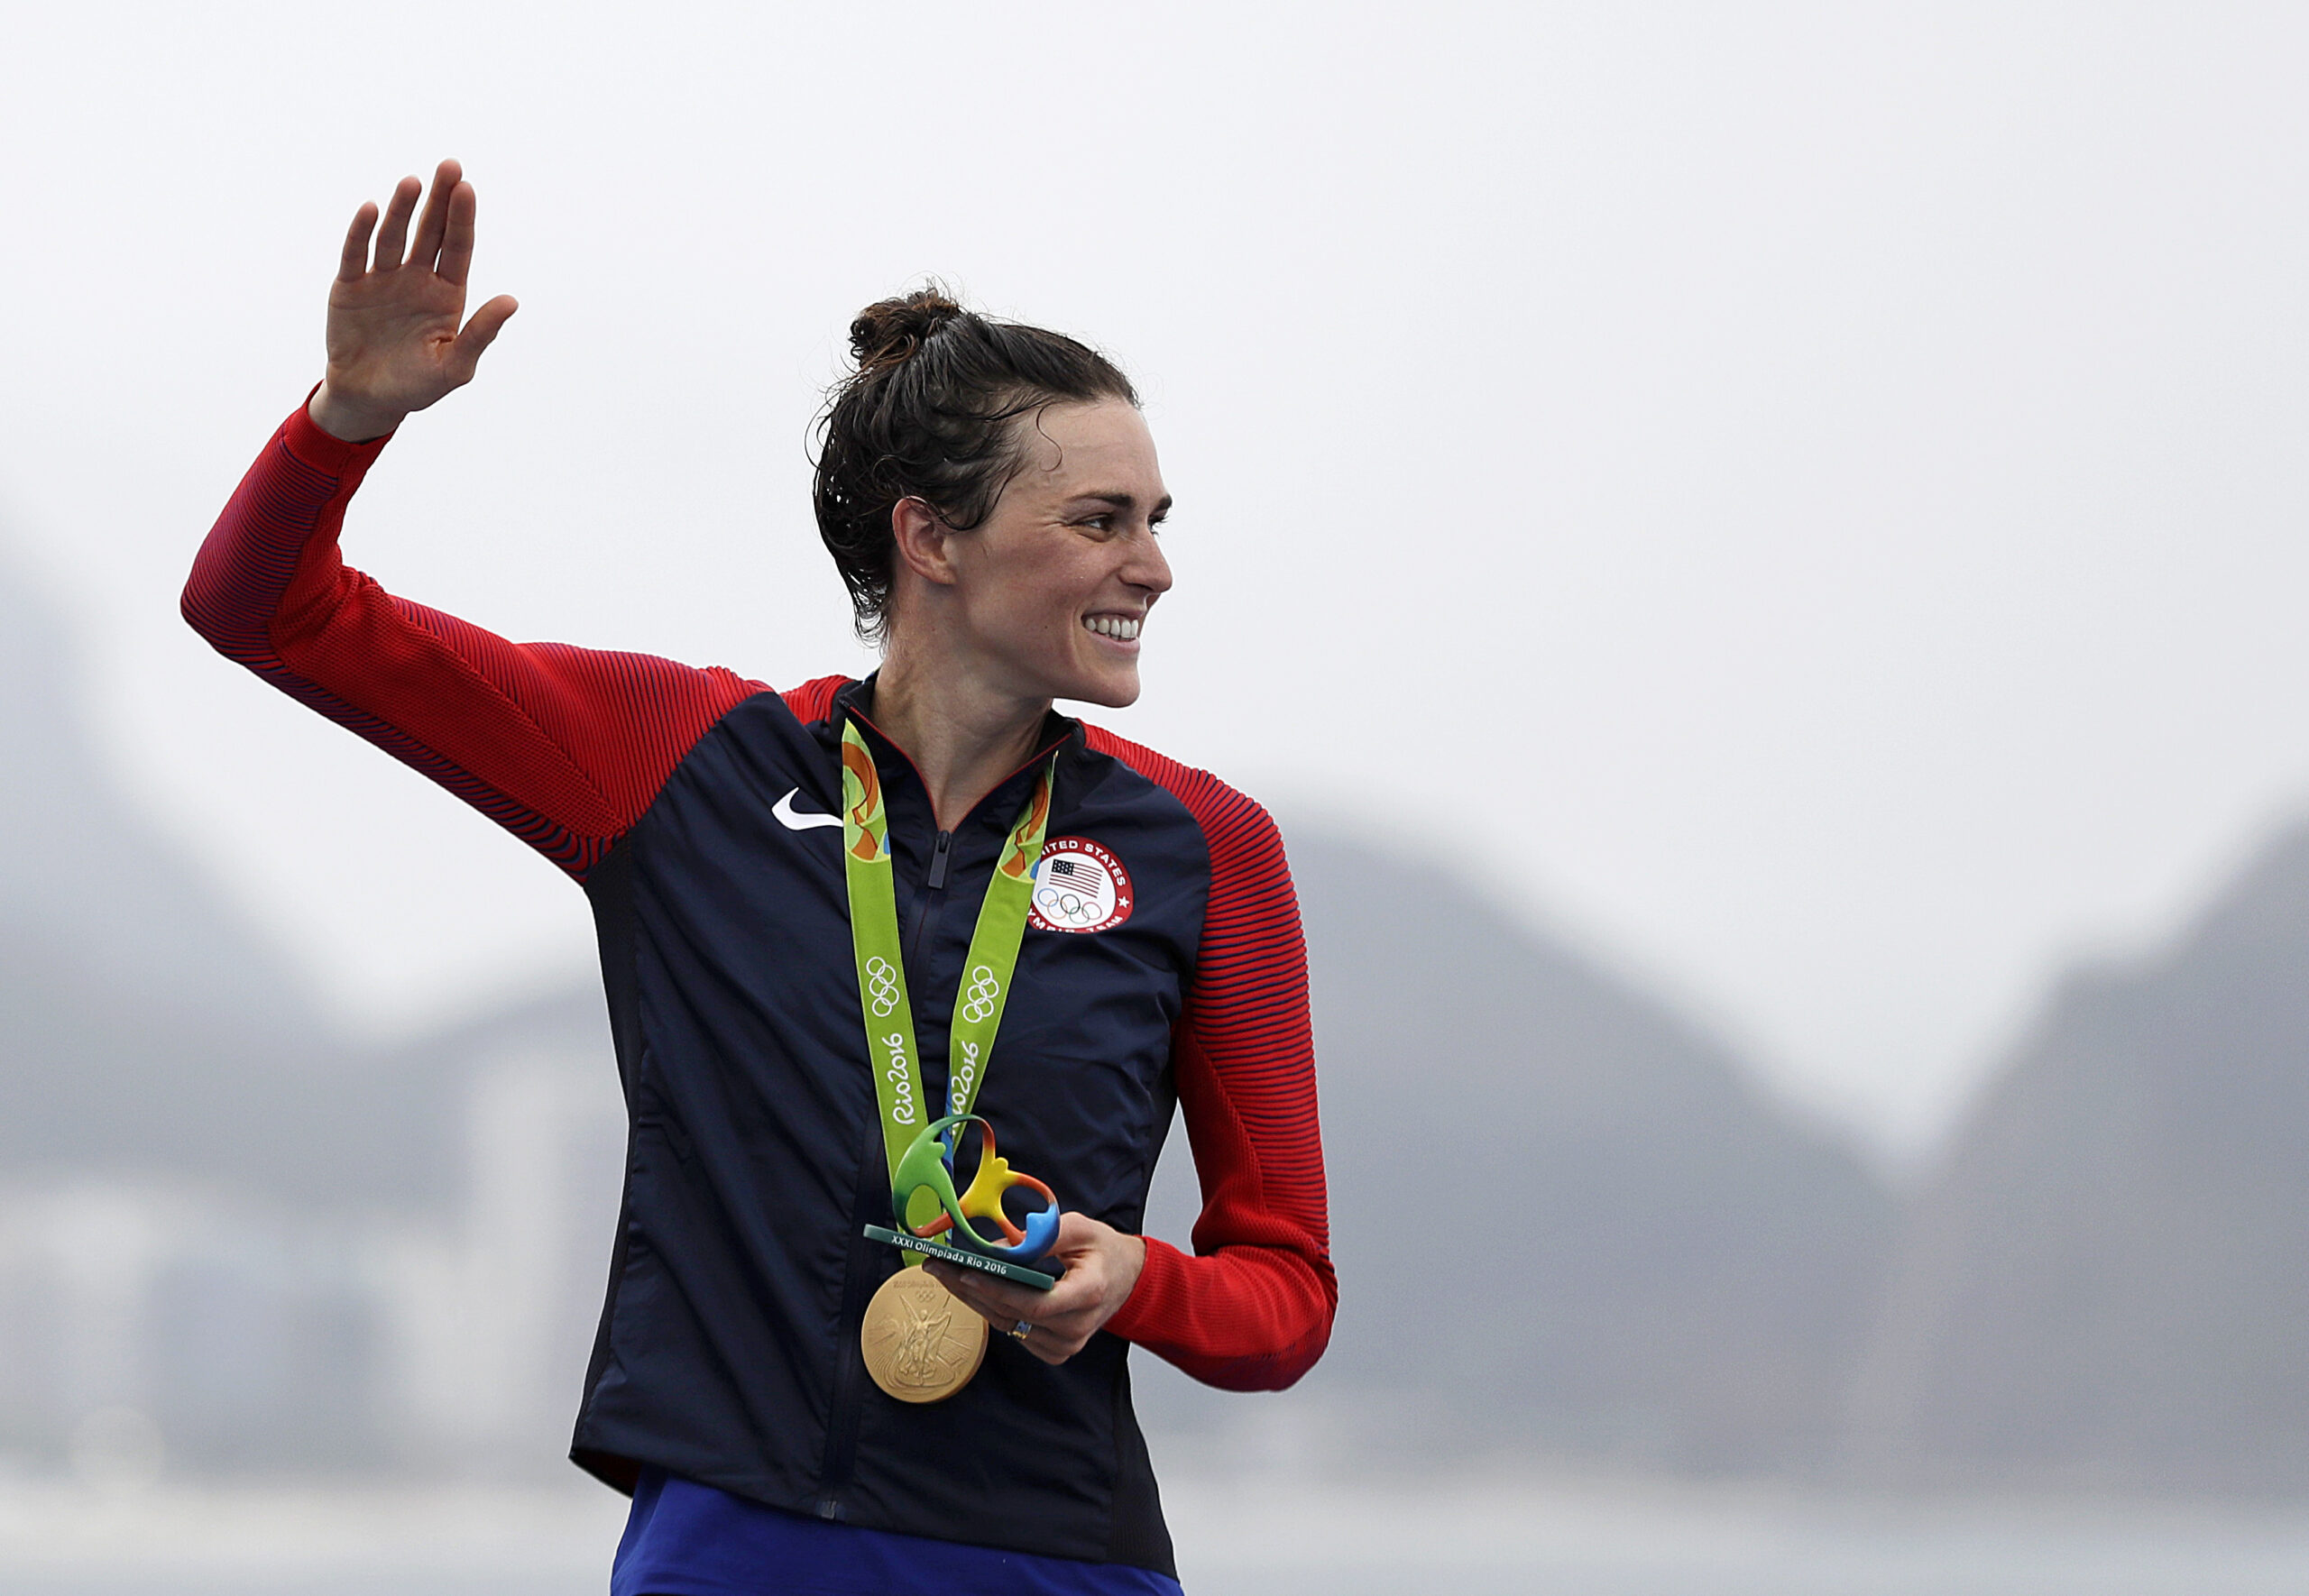 Gwen Jorgensen waves after receiving the gold medal in the women's triathlon at the 2016 Summer Olympics